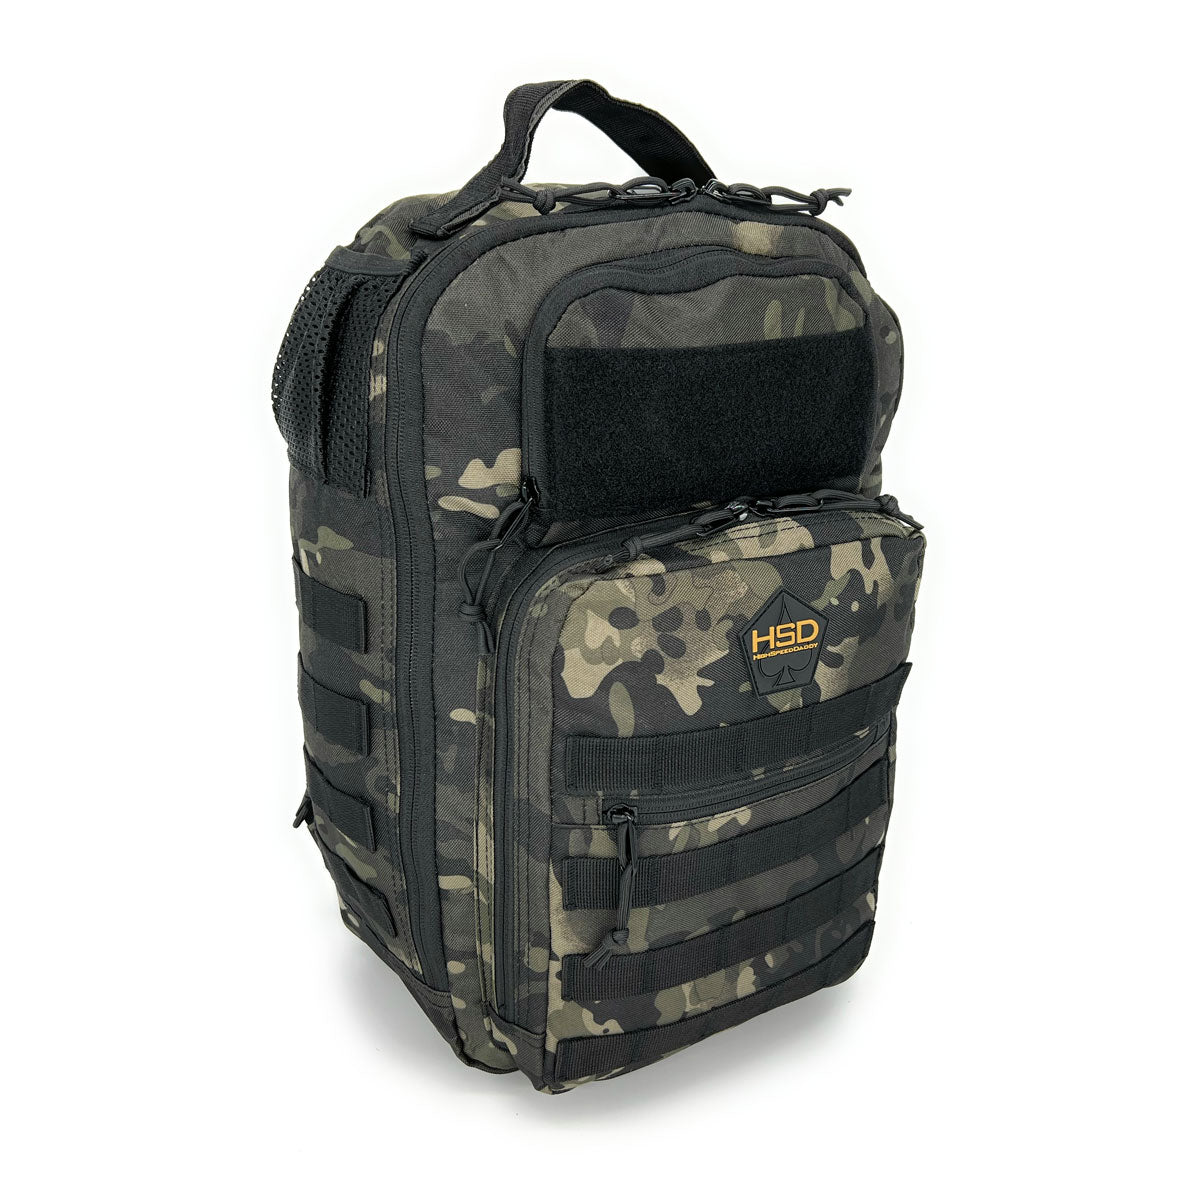 Gear Review: The High Speed Daddy Tactical Diaper Bag, One Year Later